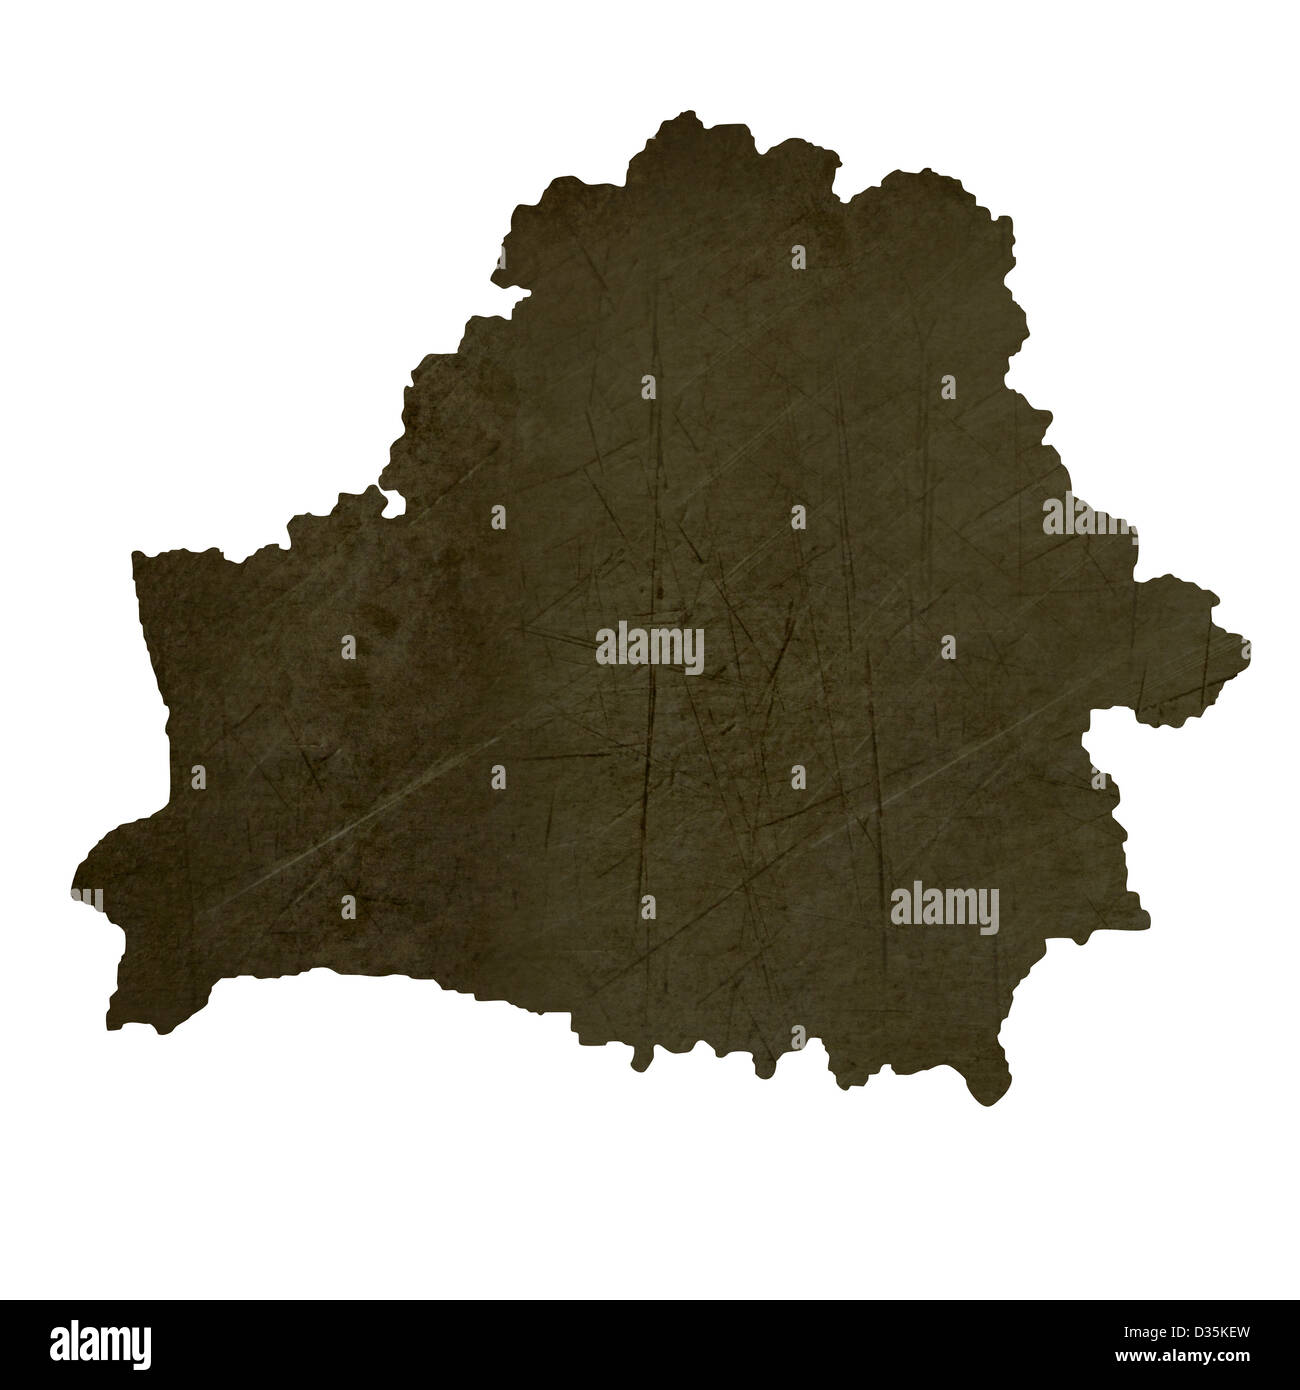 Dark silhouetted and textured map of Belarus isolated on white background. Stock Photo